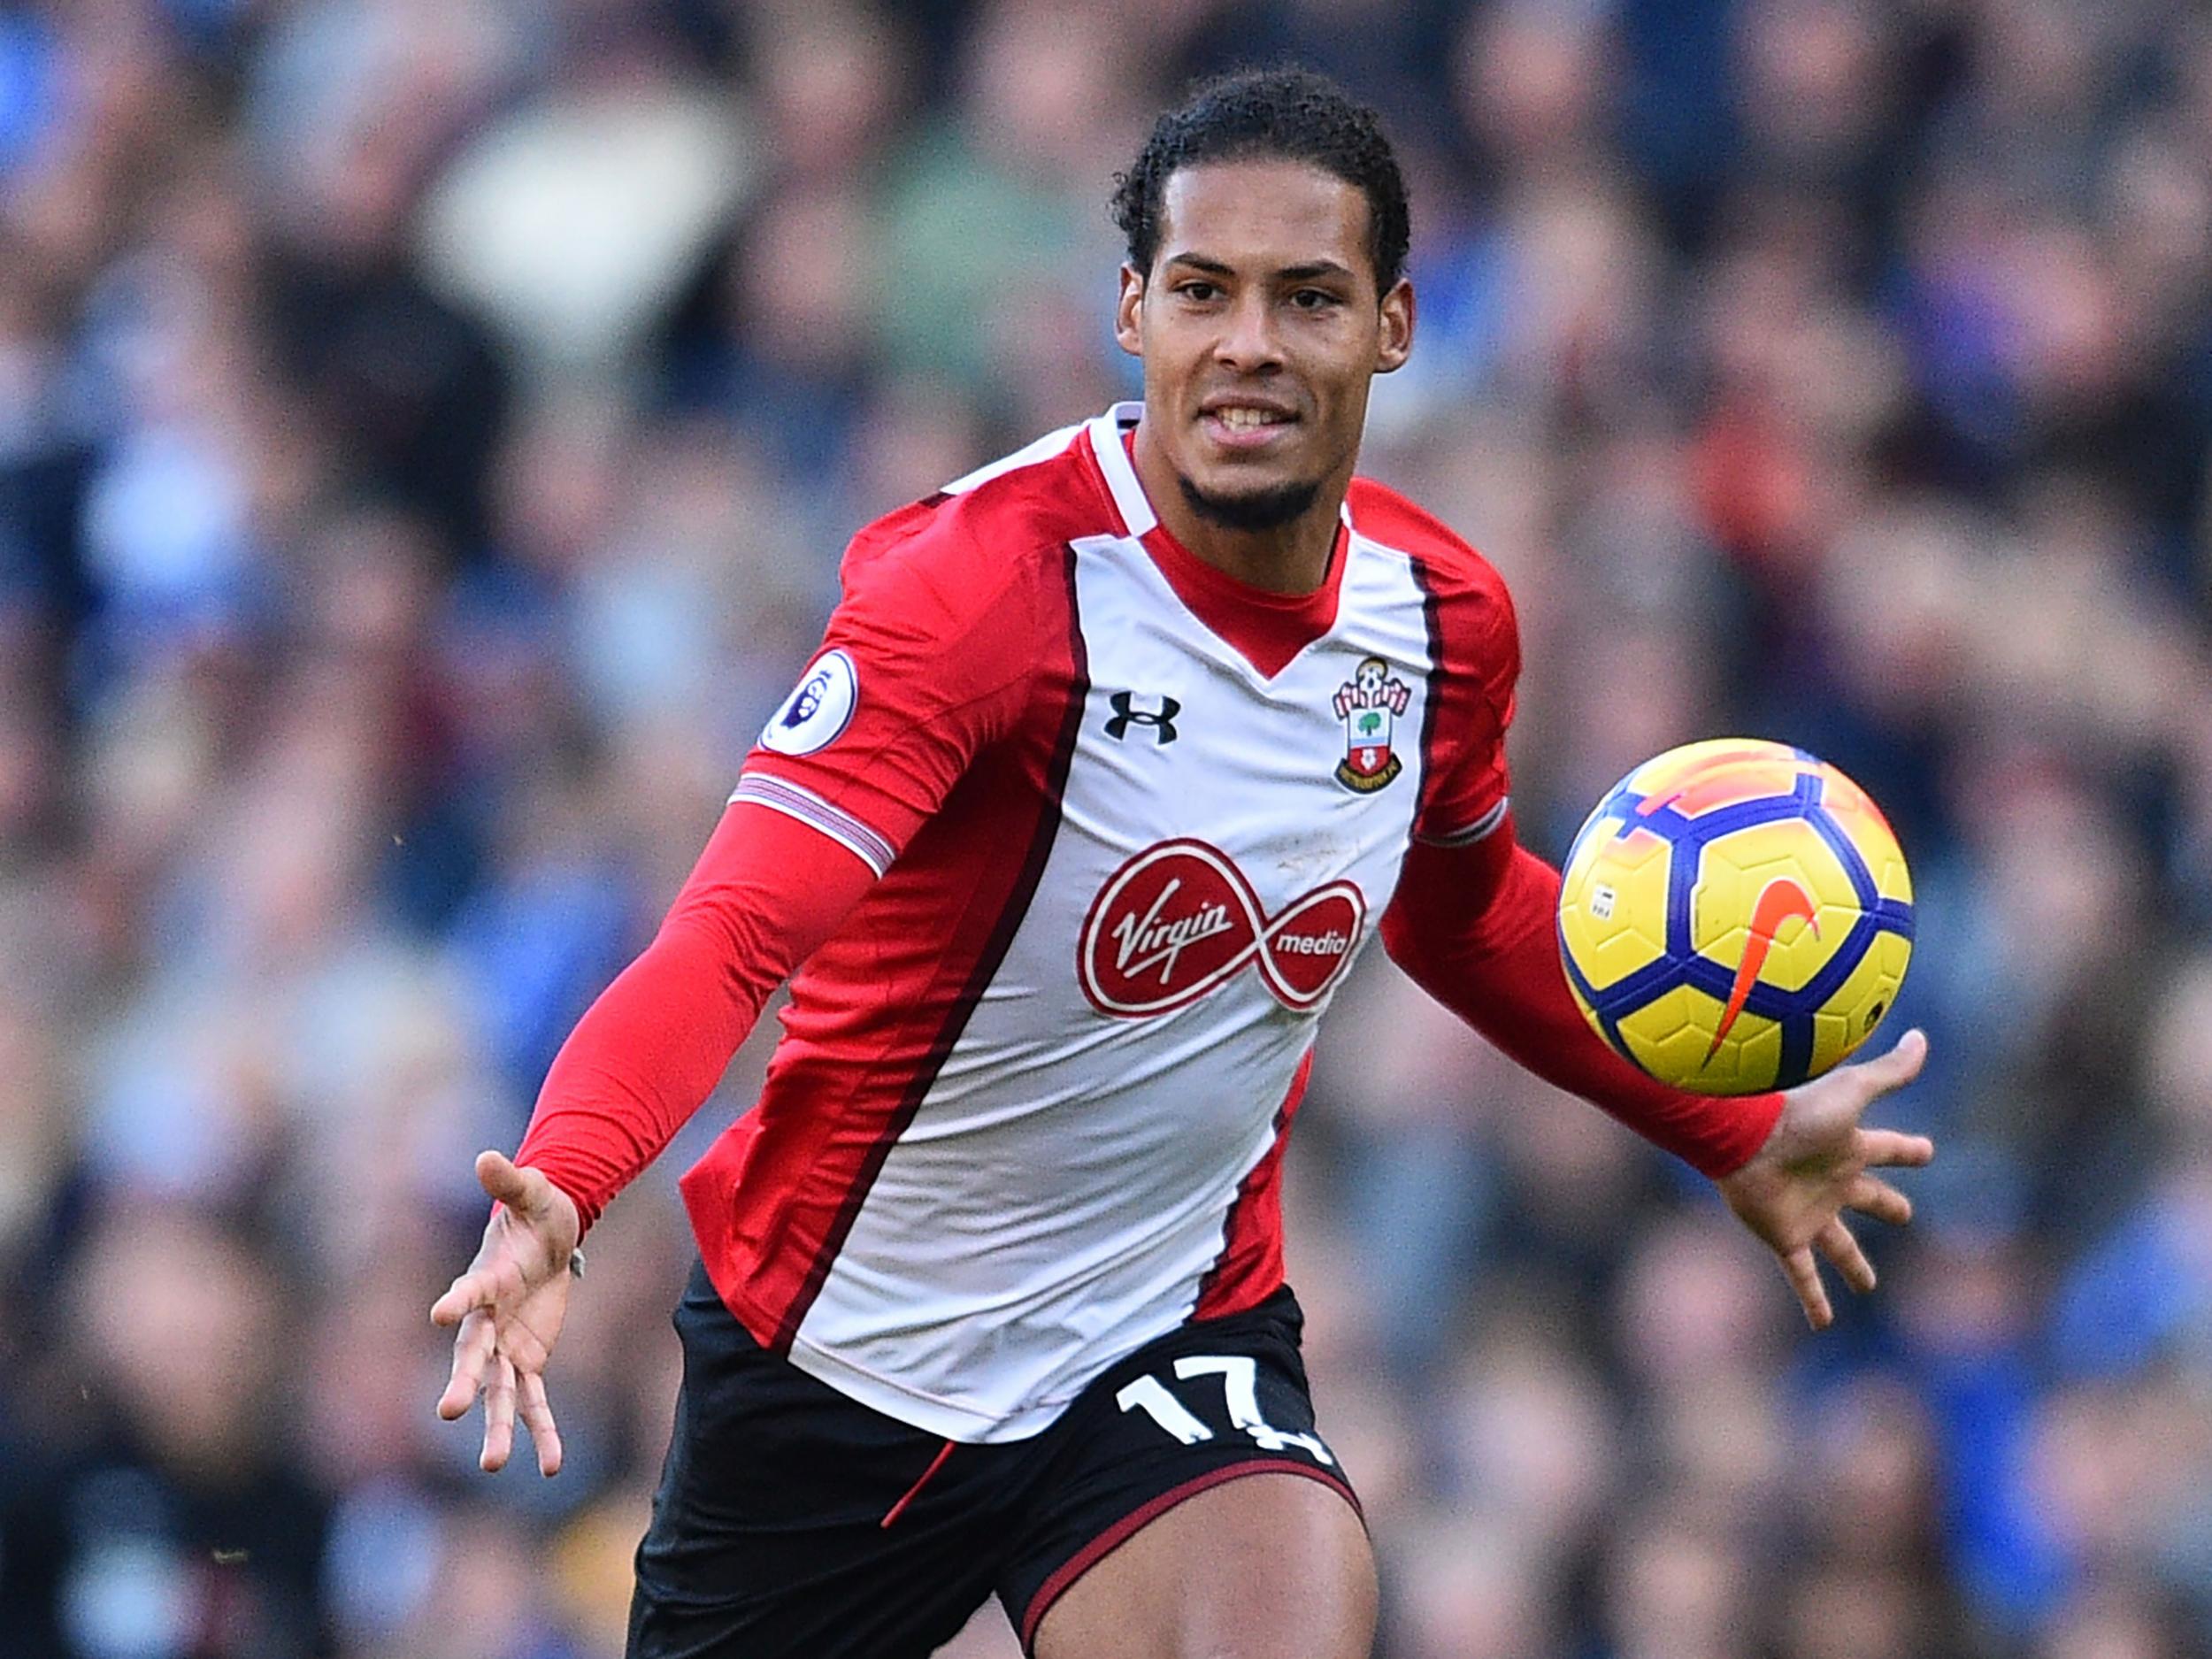 Virgil van Dijk saw a summer transfer request rejected by Southampton